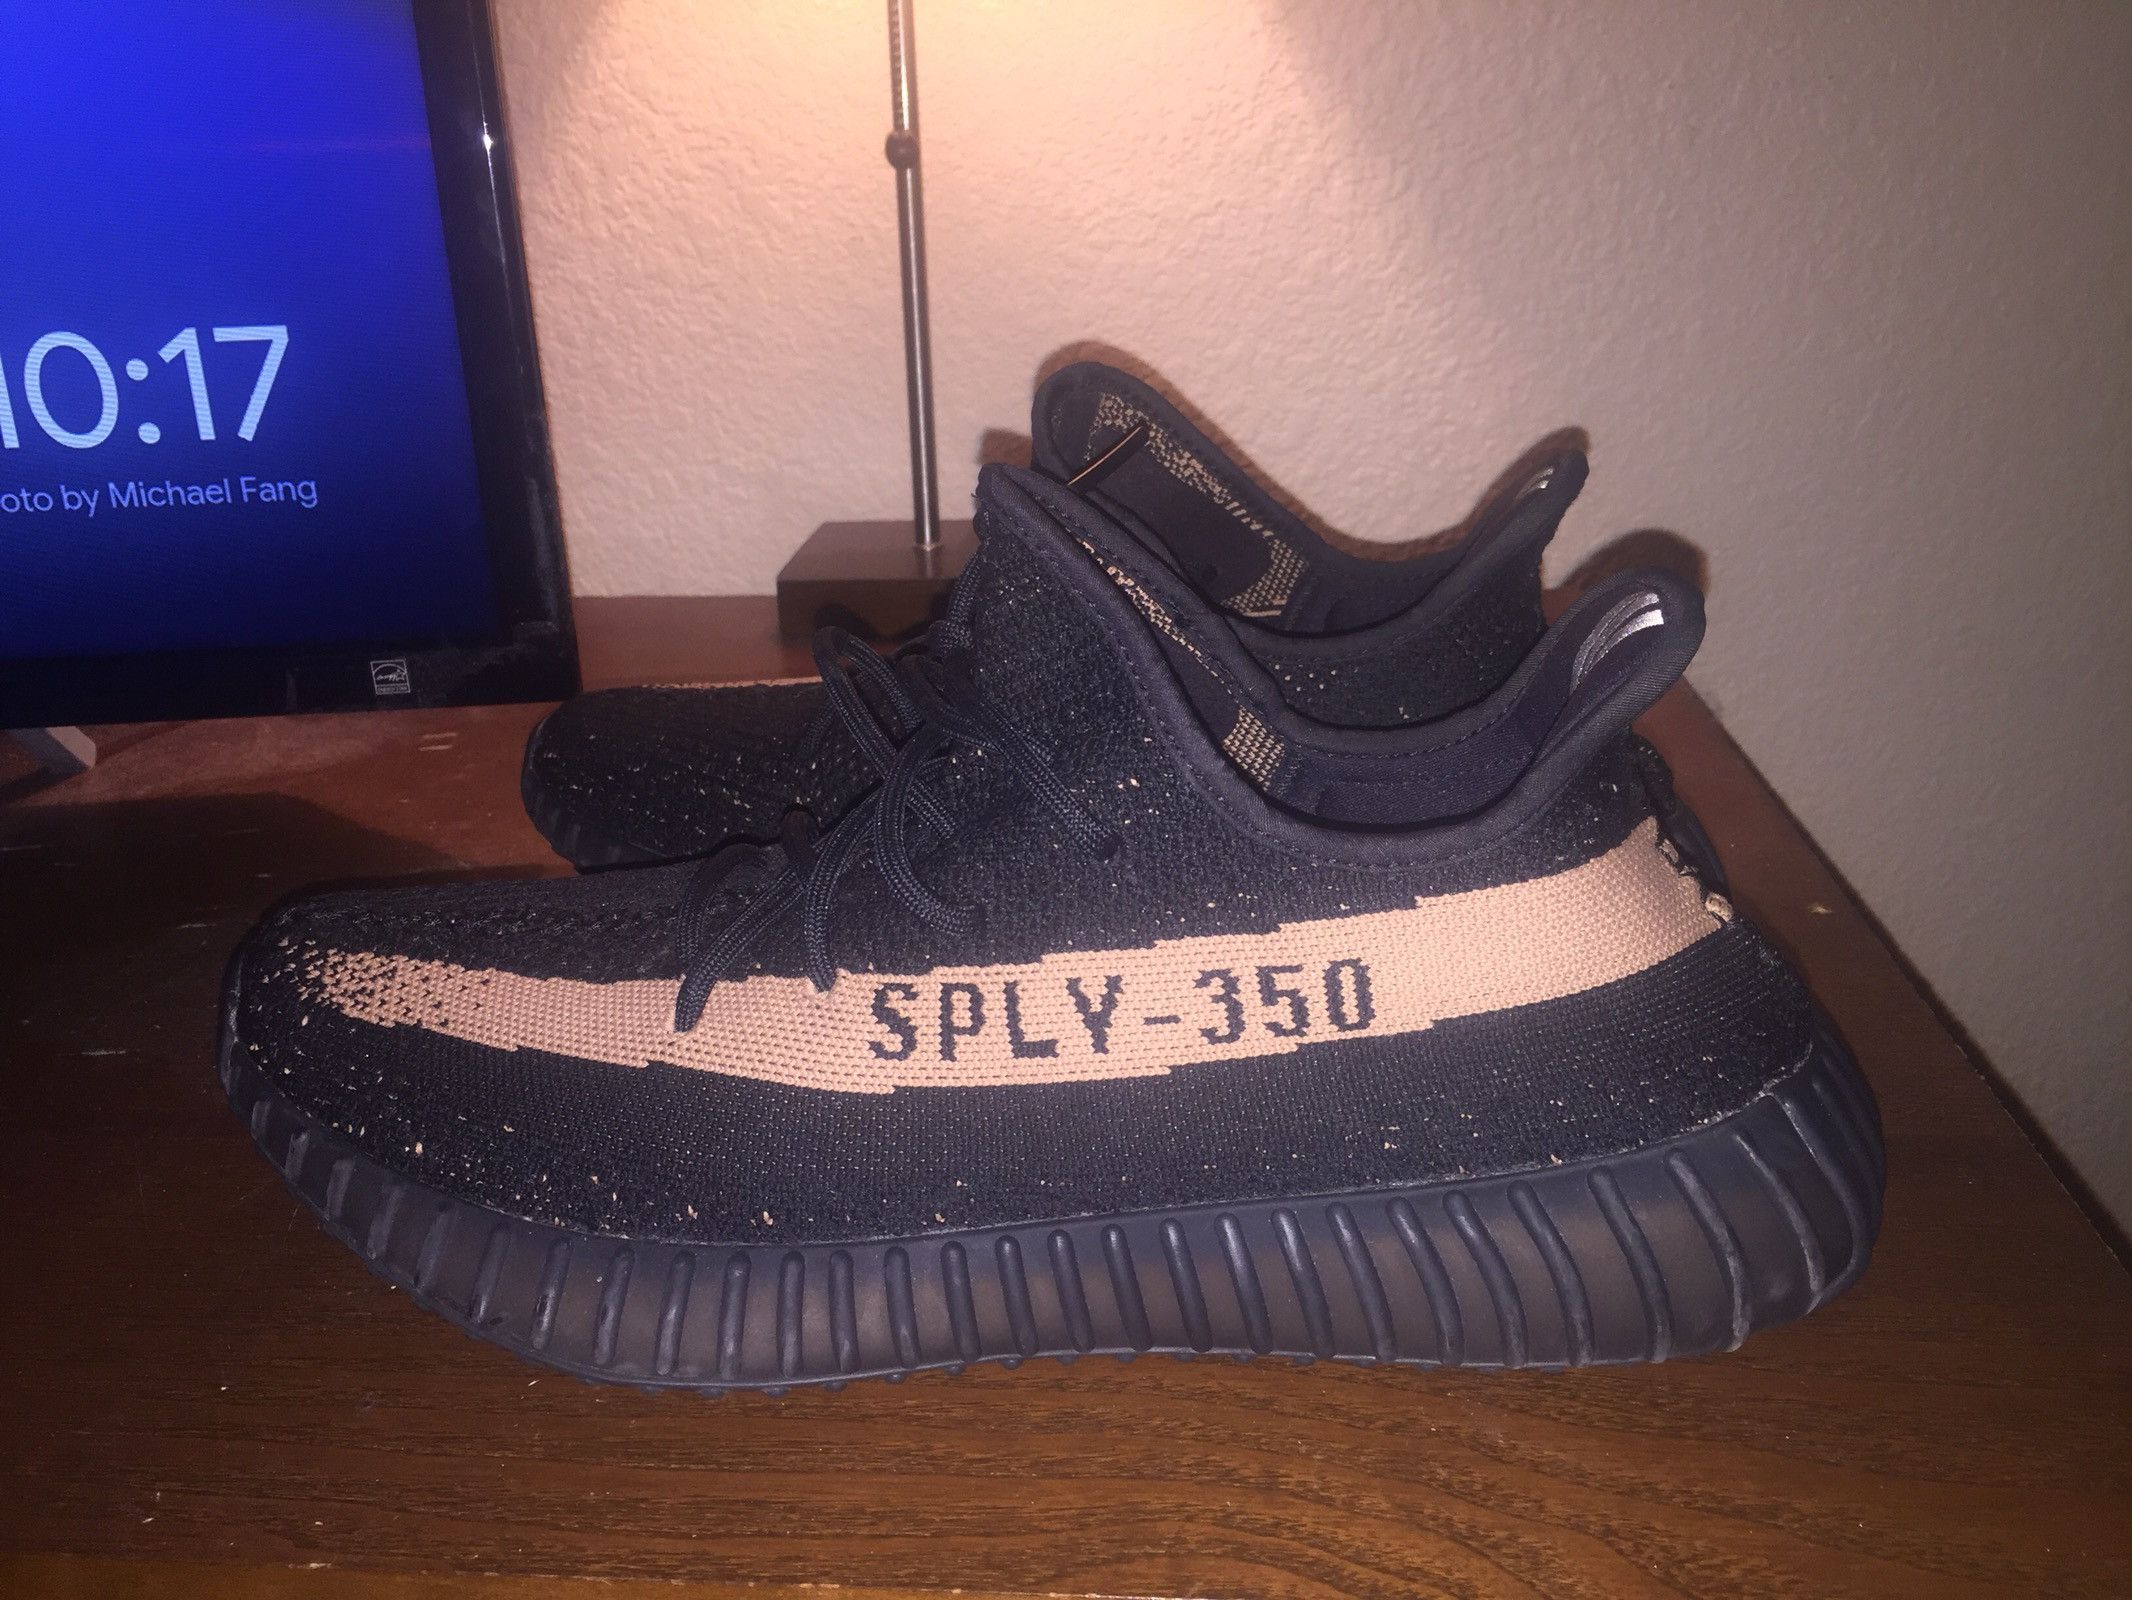 Adidas Yeezy 350 Boost V2 Copper Size US 12 / EU 45 - 1 Preview